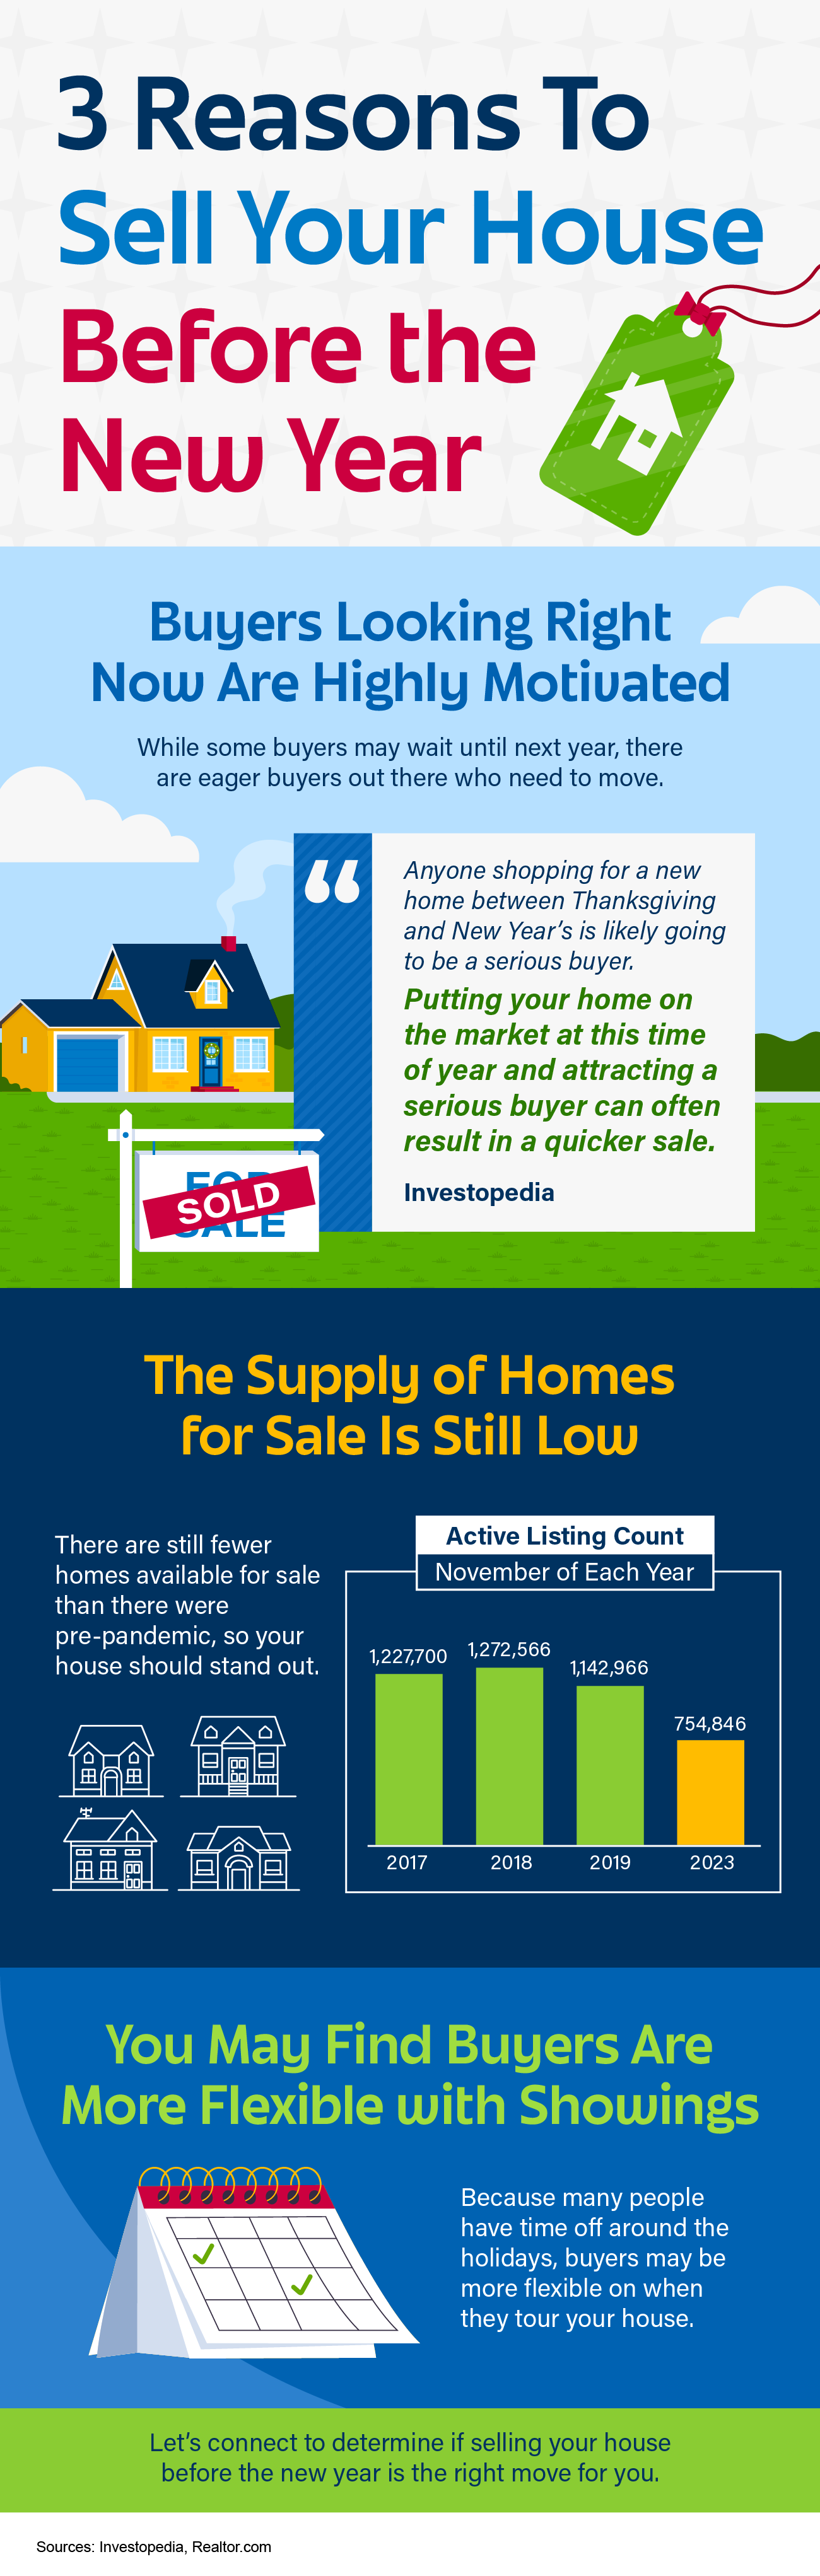 3 Reasons To Sell Your House Before the New Year - KM Realty Group LLC, Infographic